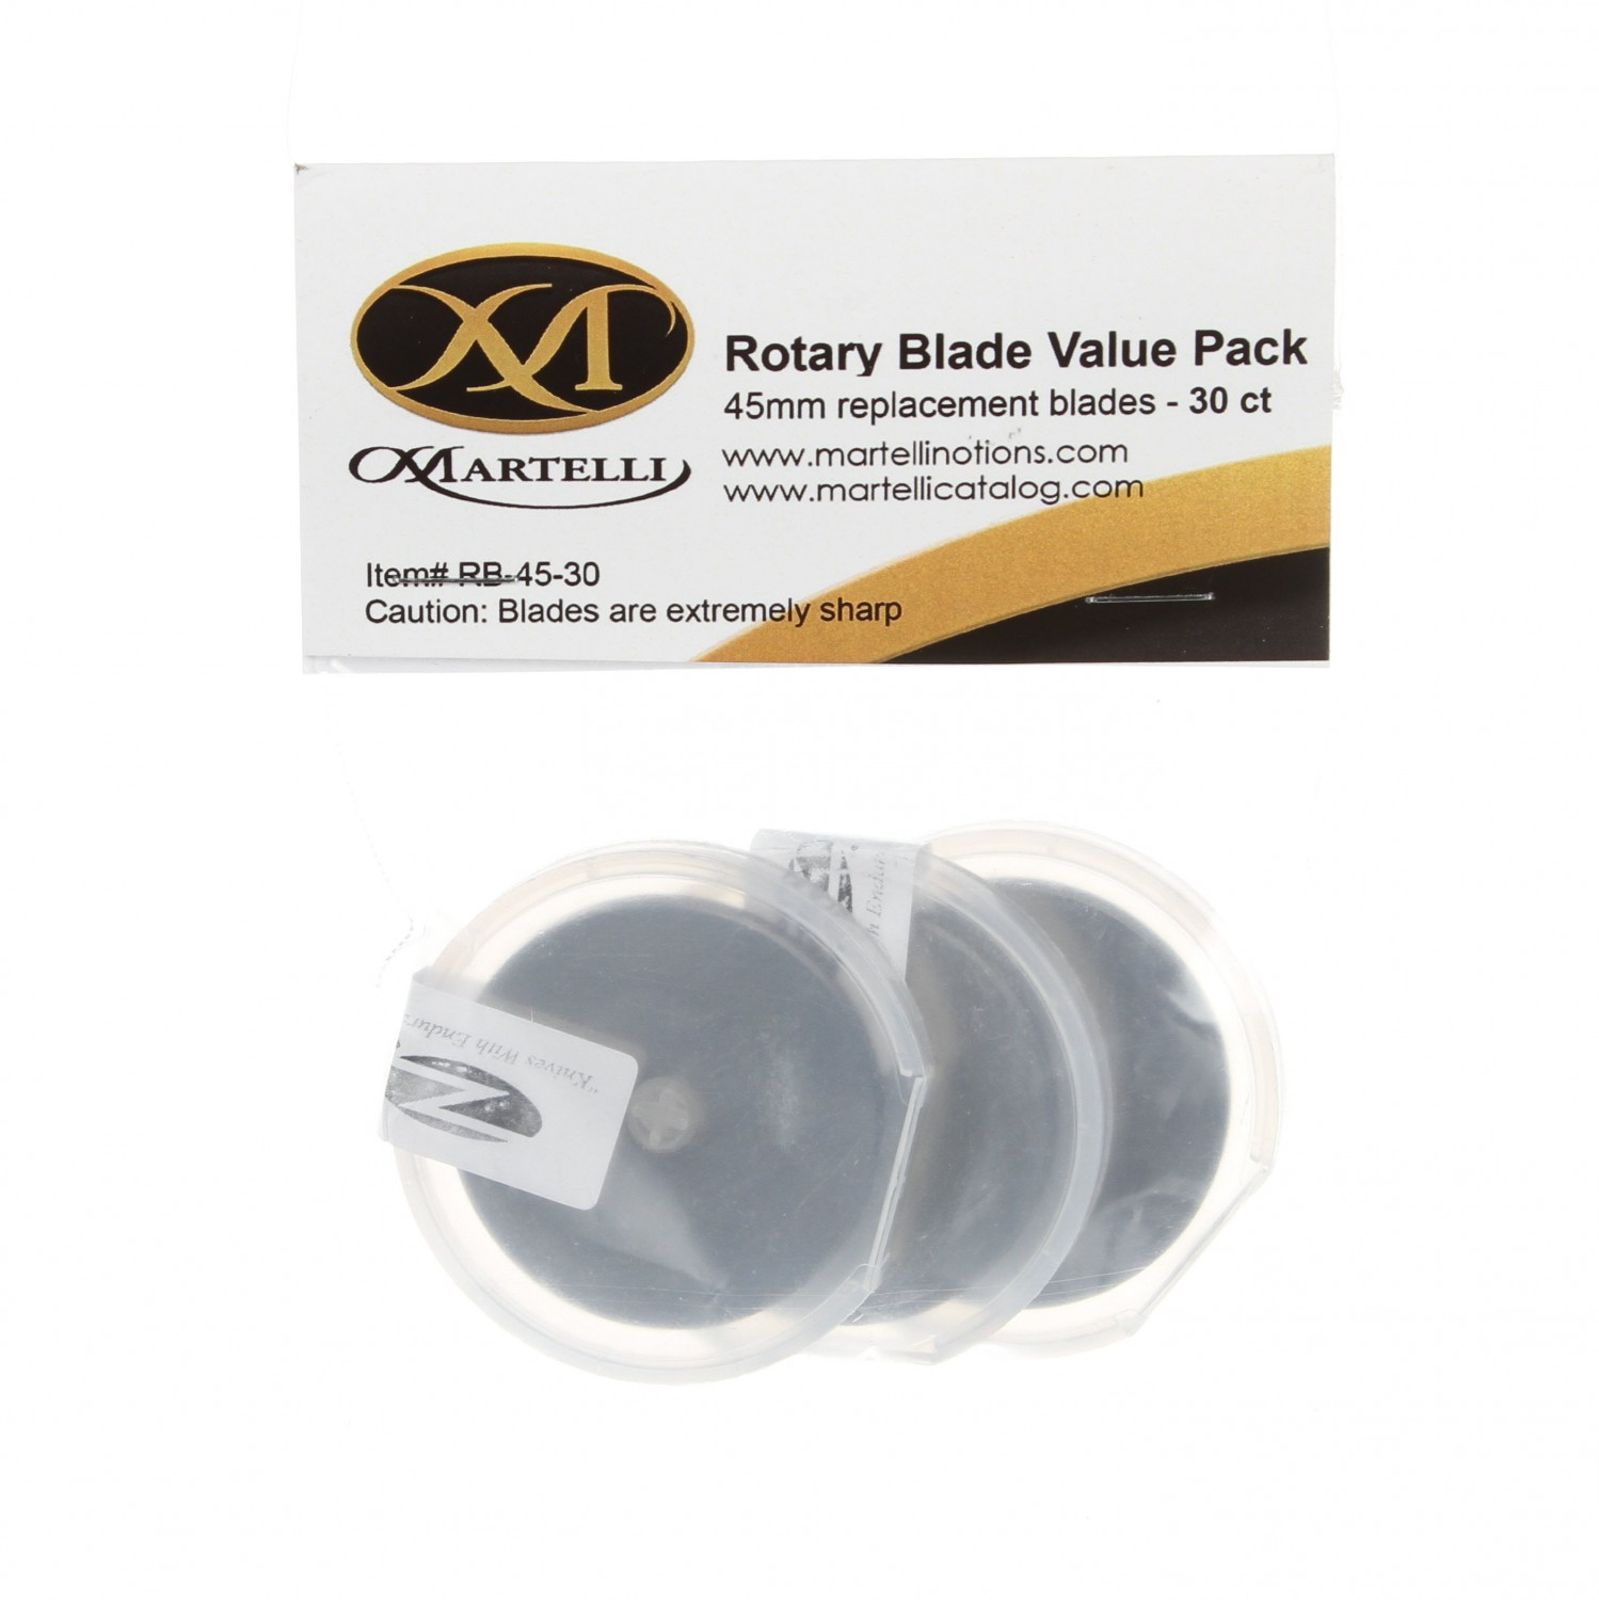 Martelli Rotary Blade 45mm Replacement Value Pack 30 Count